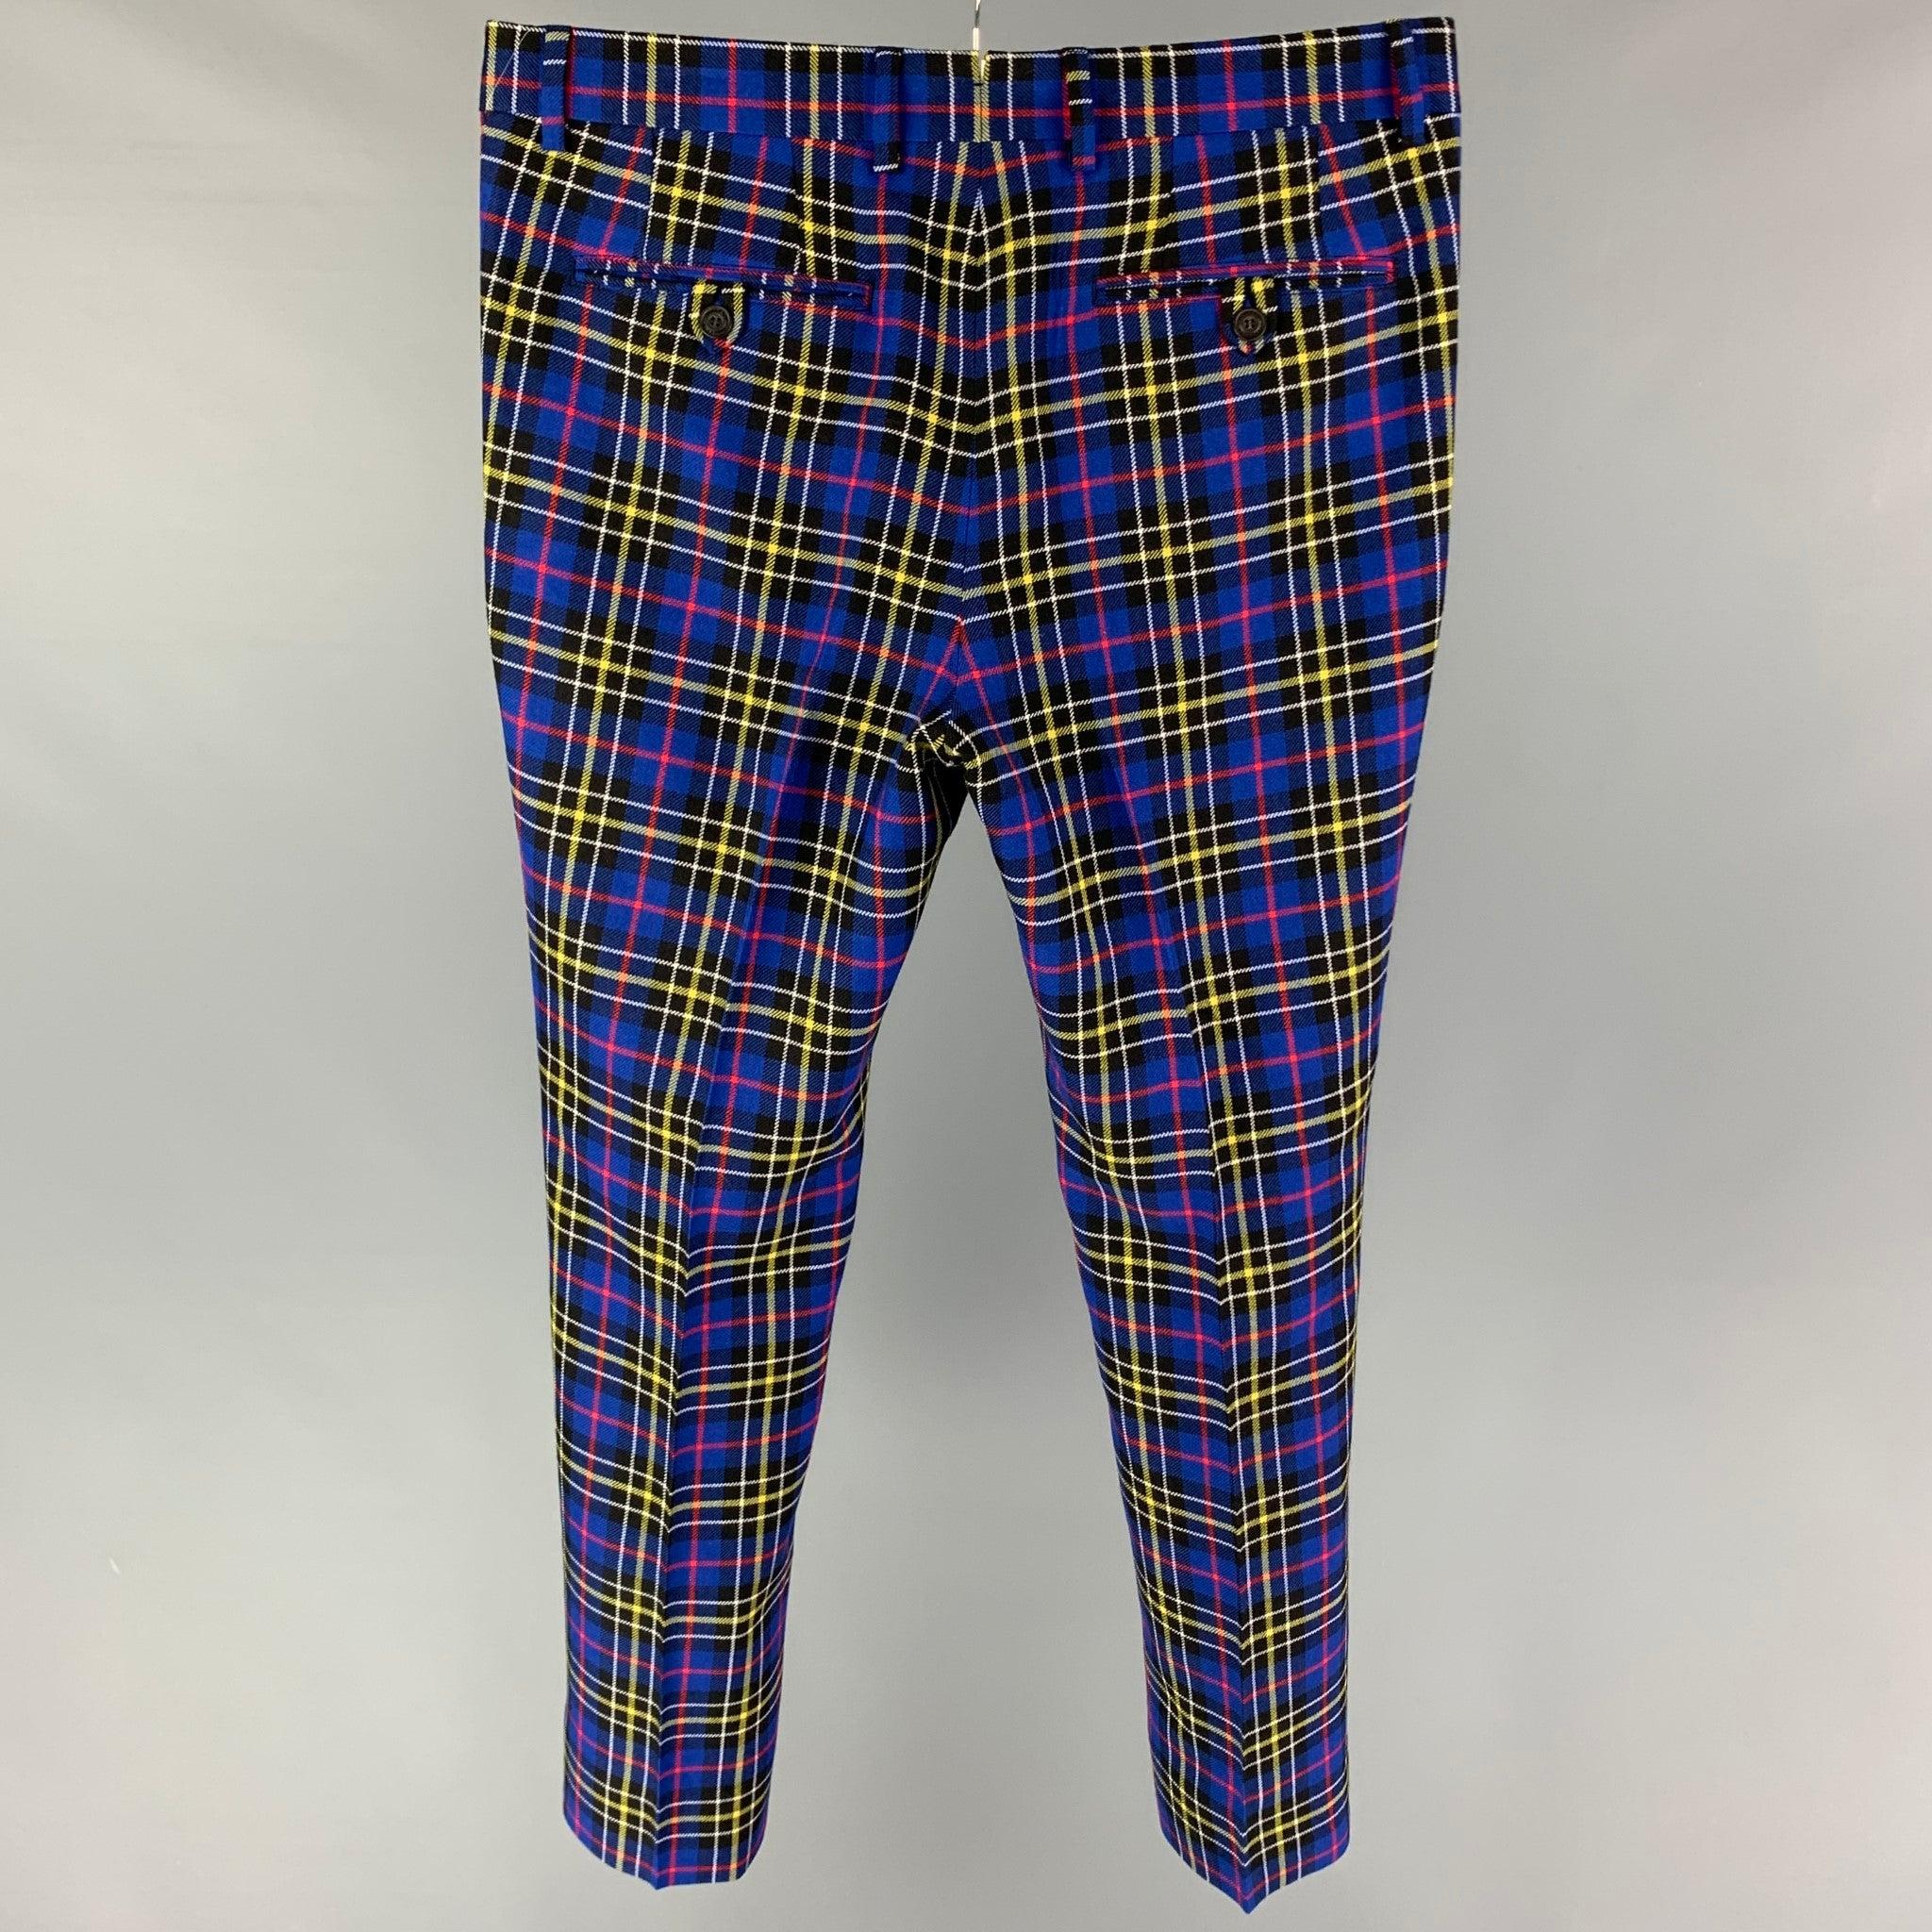 BURBERRY dress pants comes in a blue multi-color plaid wool featuring a flat front, front tab, and a zip fly closure. Made in Italy.
Very Good Pre-Owned Condition. 

Marked:   50 

Measurements: 
  Waist: 34 inches  Rise: 10 inches  Inseam: 30